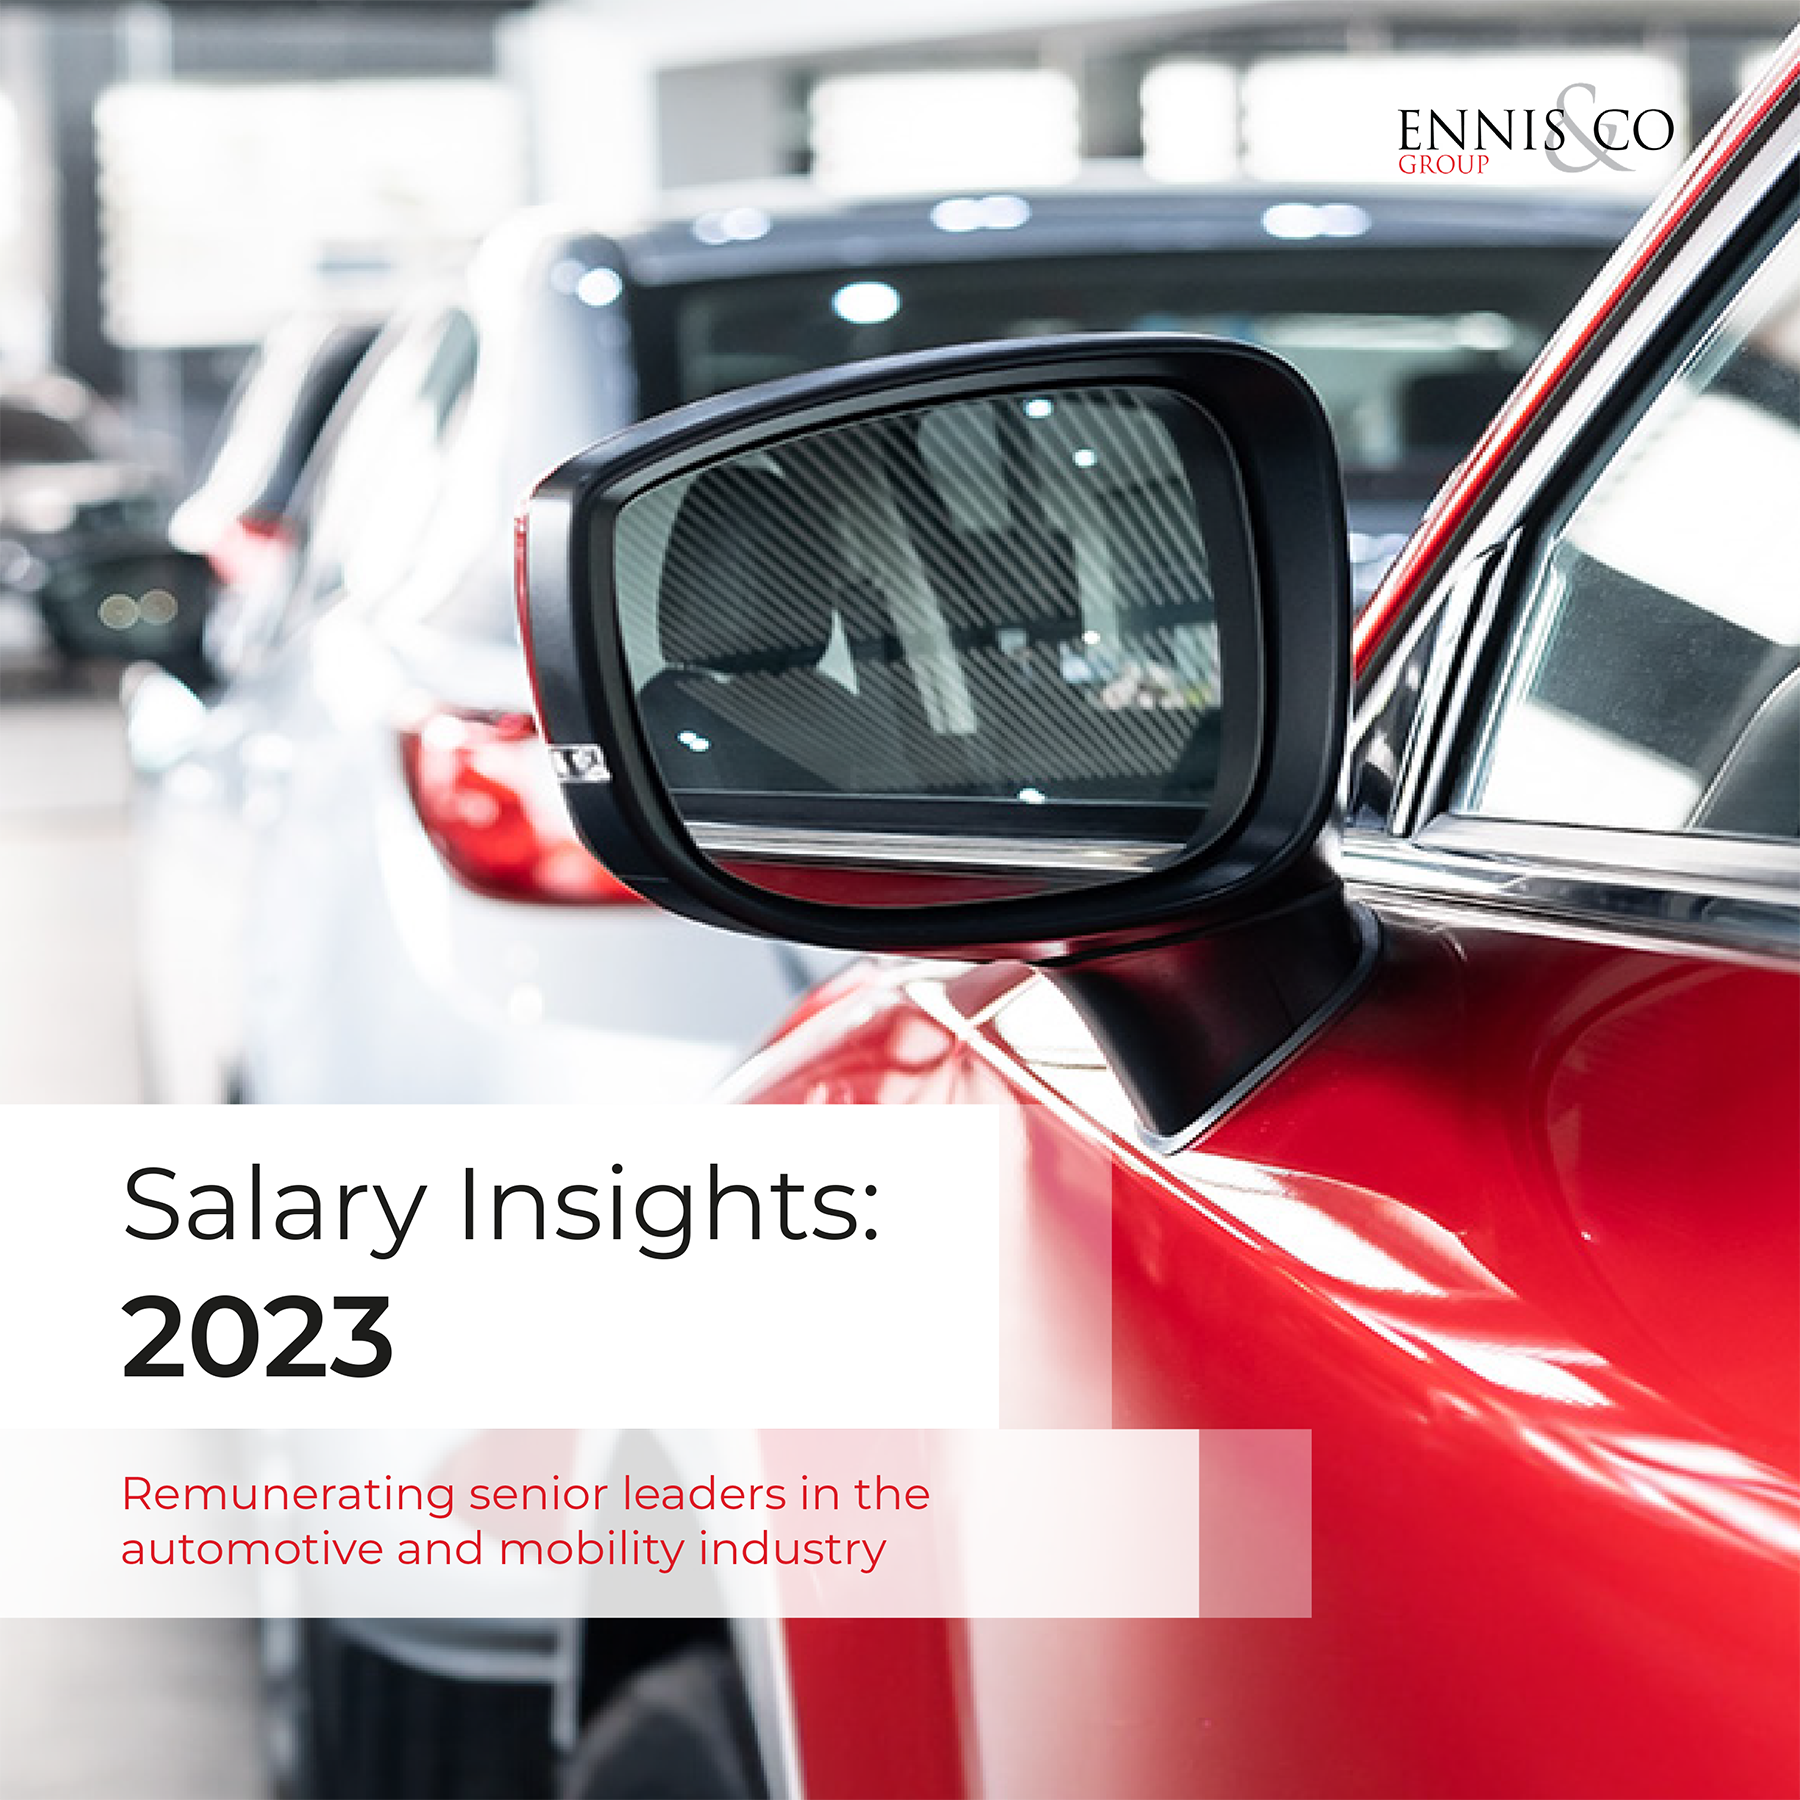 Ennis & Co Salary Insights Report 2023